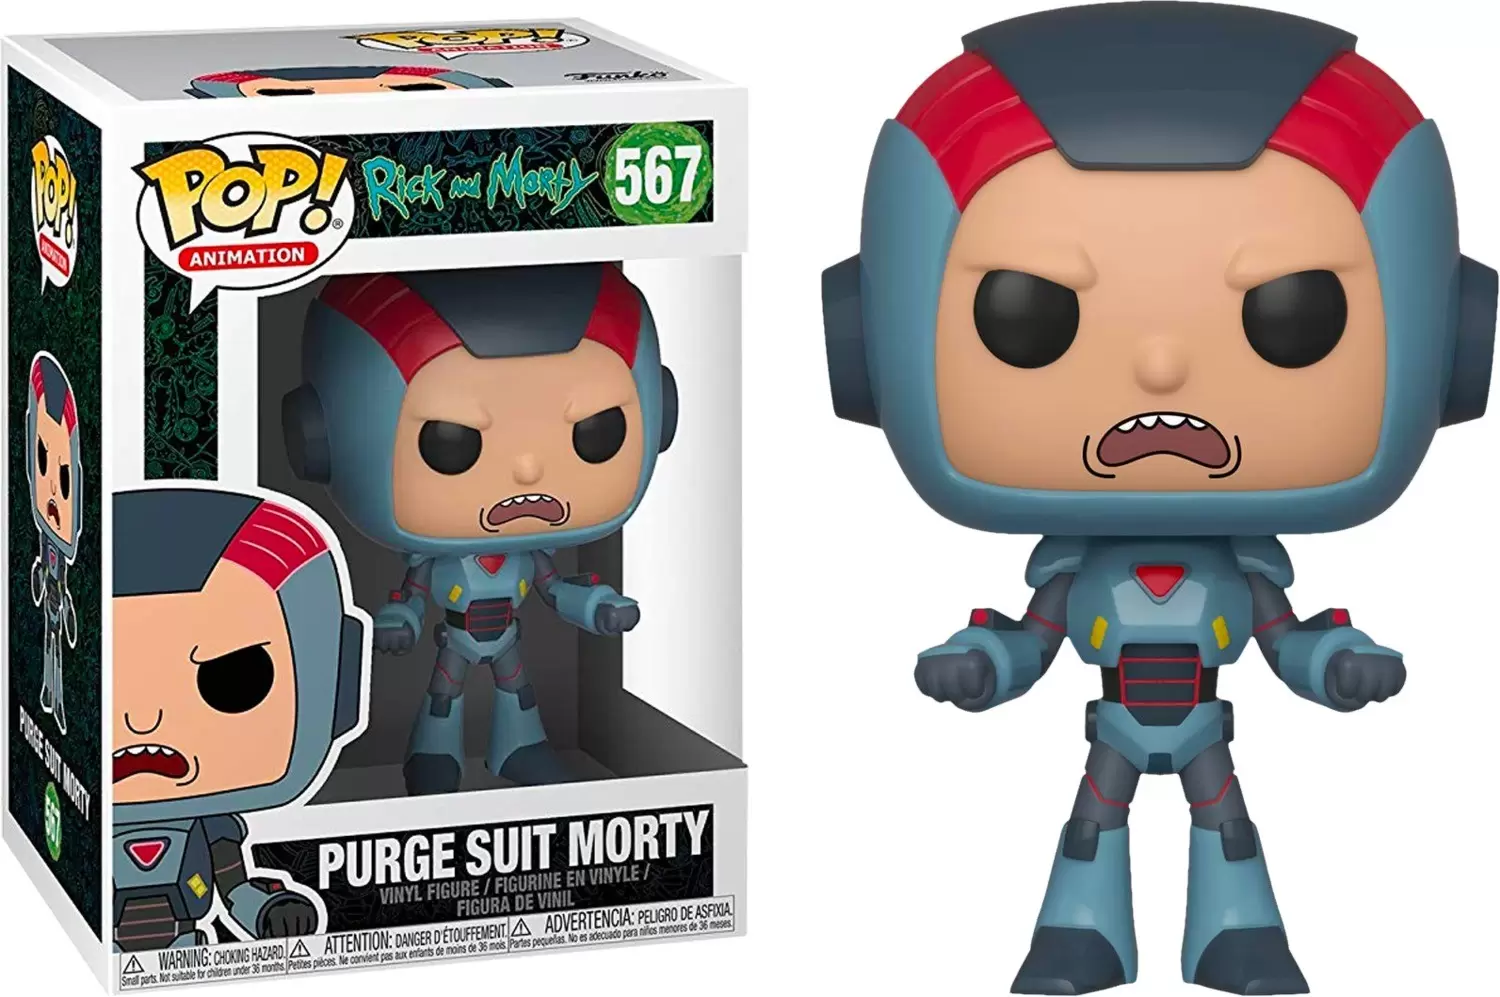 POP! Animation - Rick and Morty - Purge Suit Morty